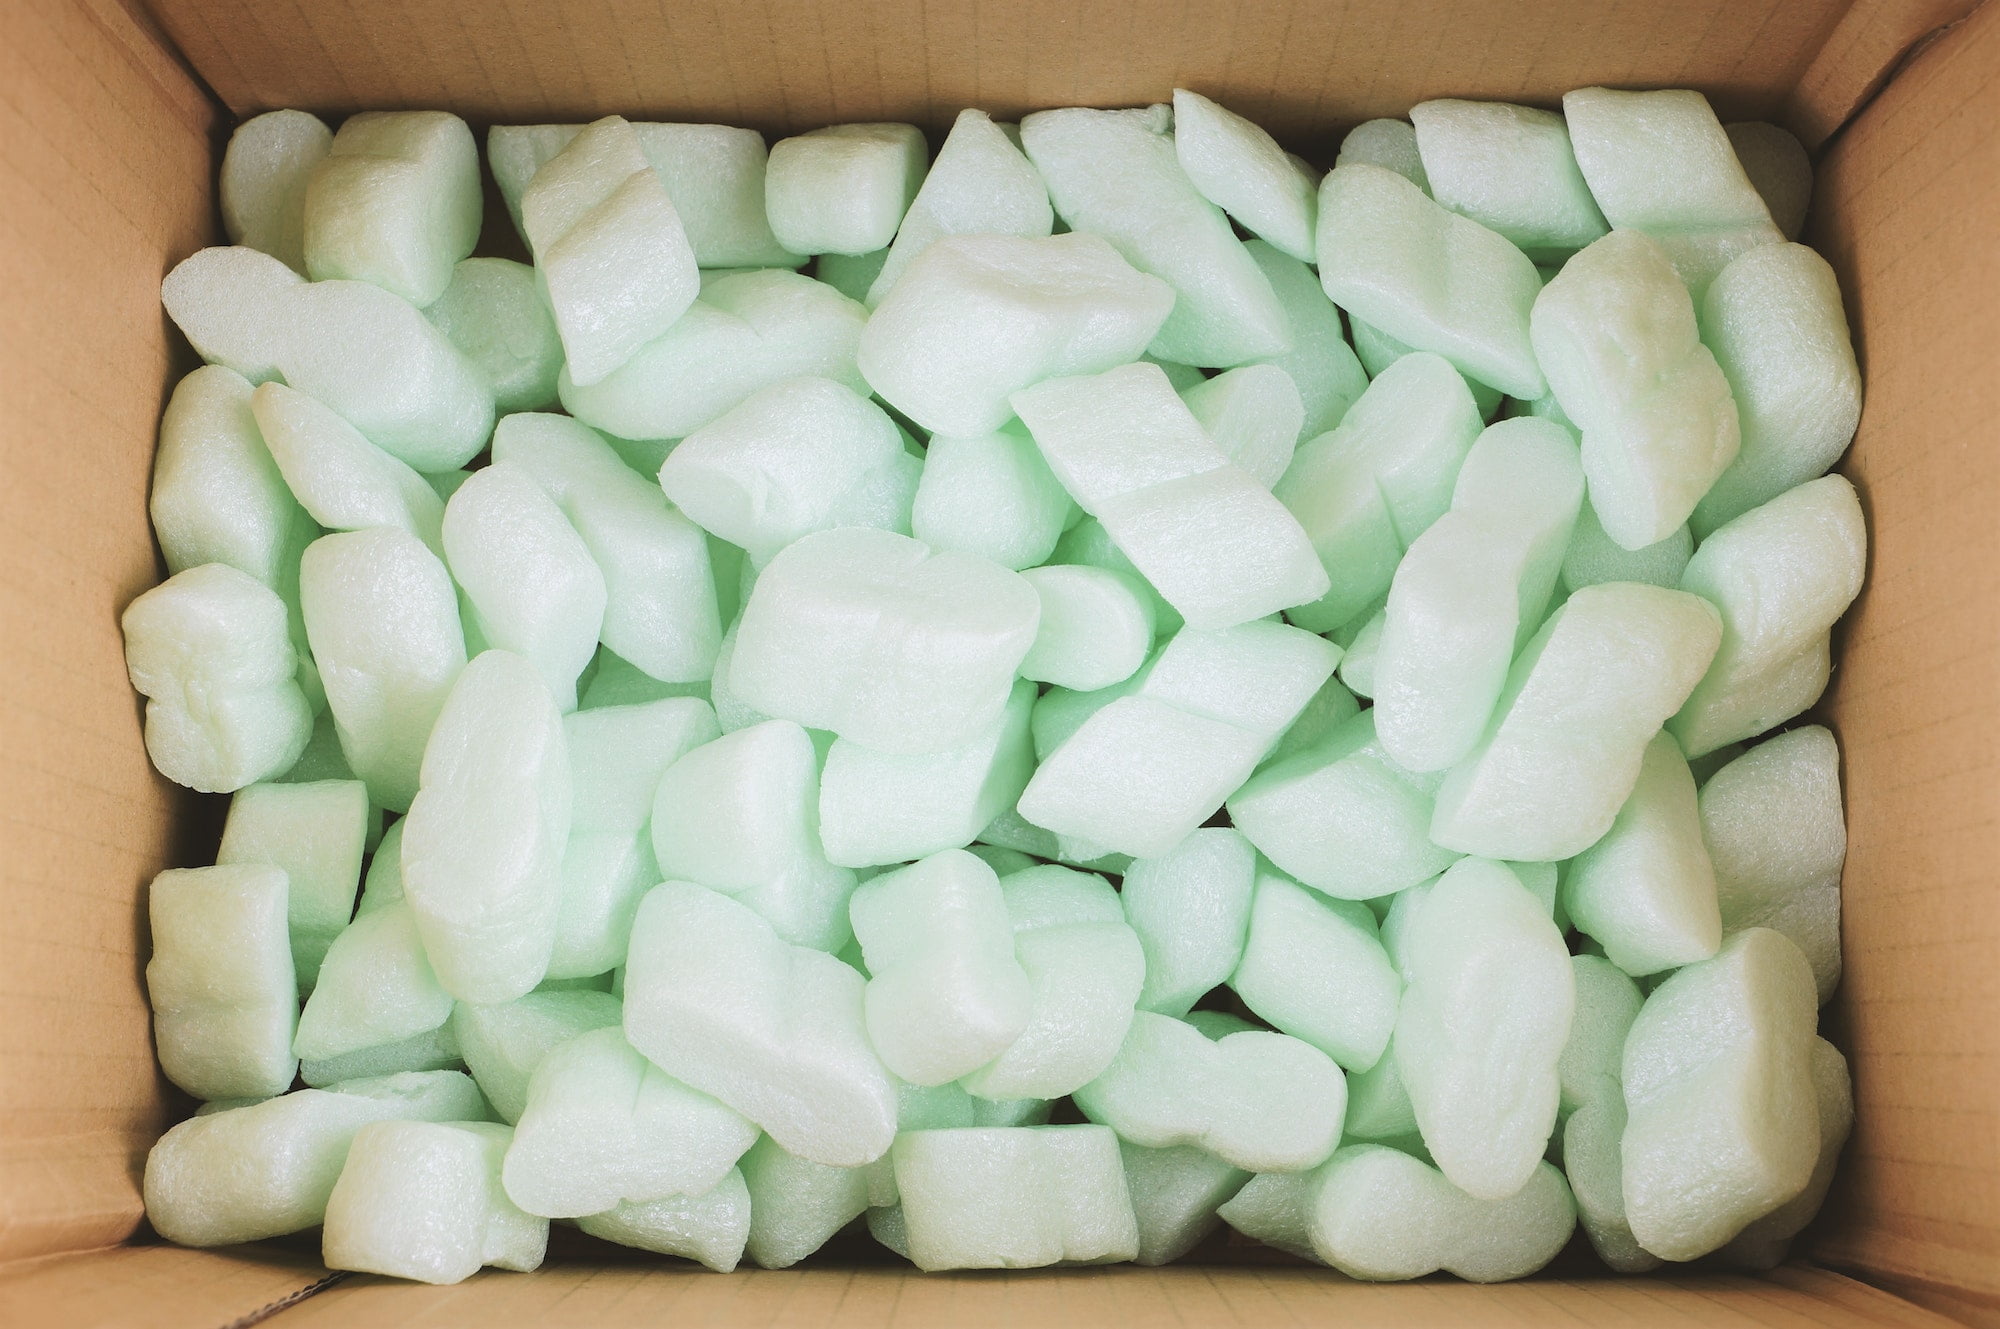 A box filled with green foam cubes.